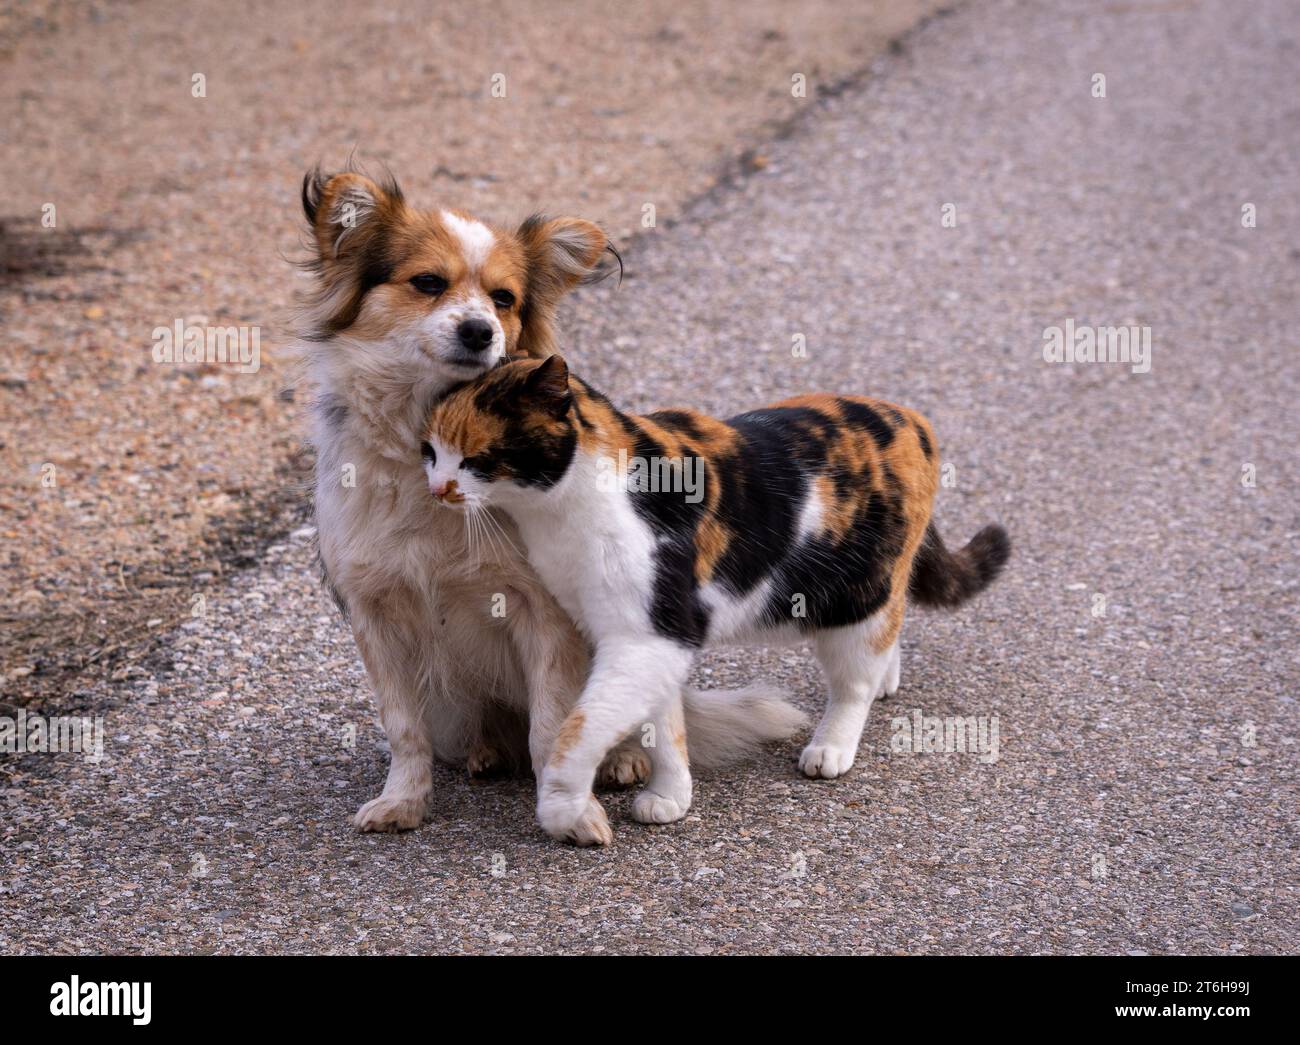 Love story concept. Stray dog and cat, with same color design. Black, brown and white. Flirting. Woof, meow. On the street. Real friends. Caring. Stock Photo